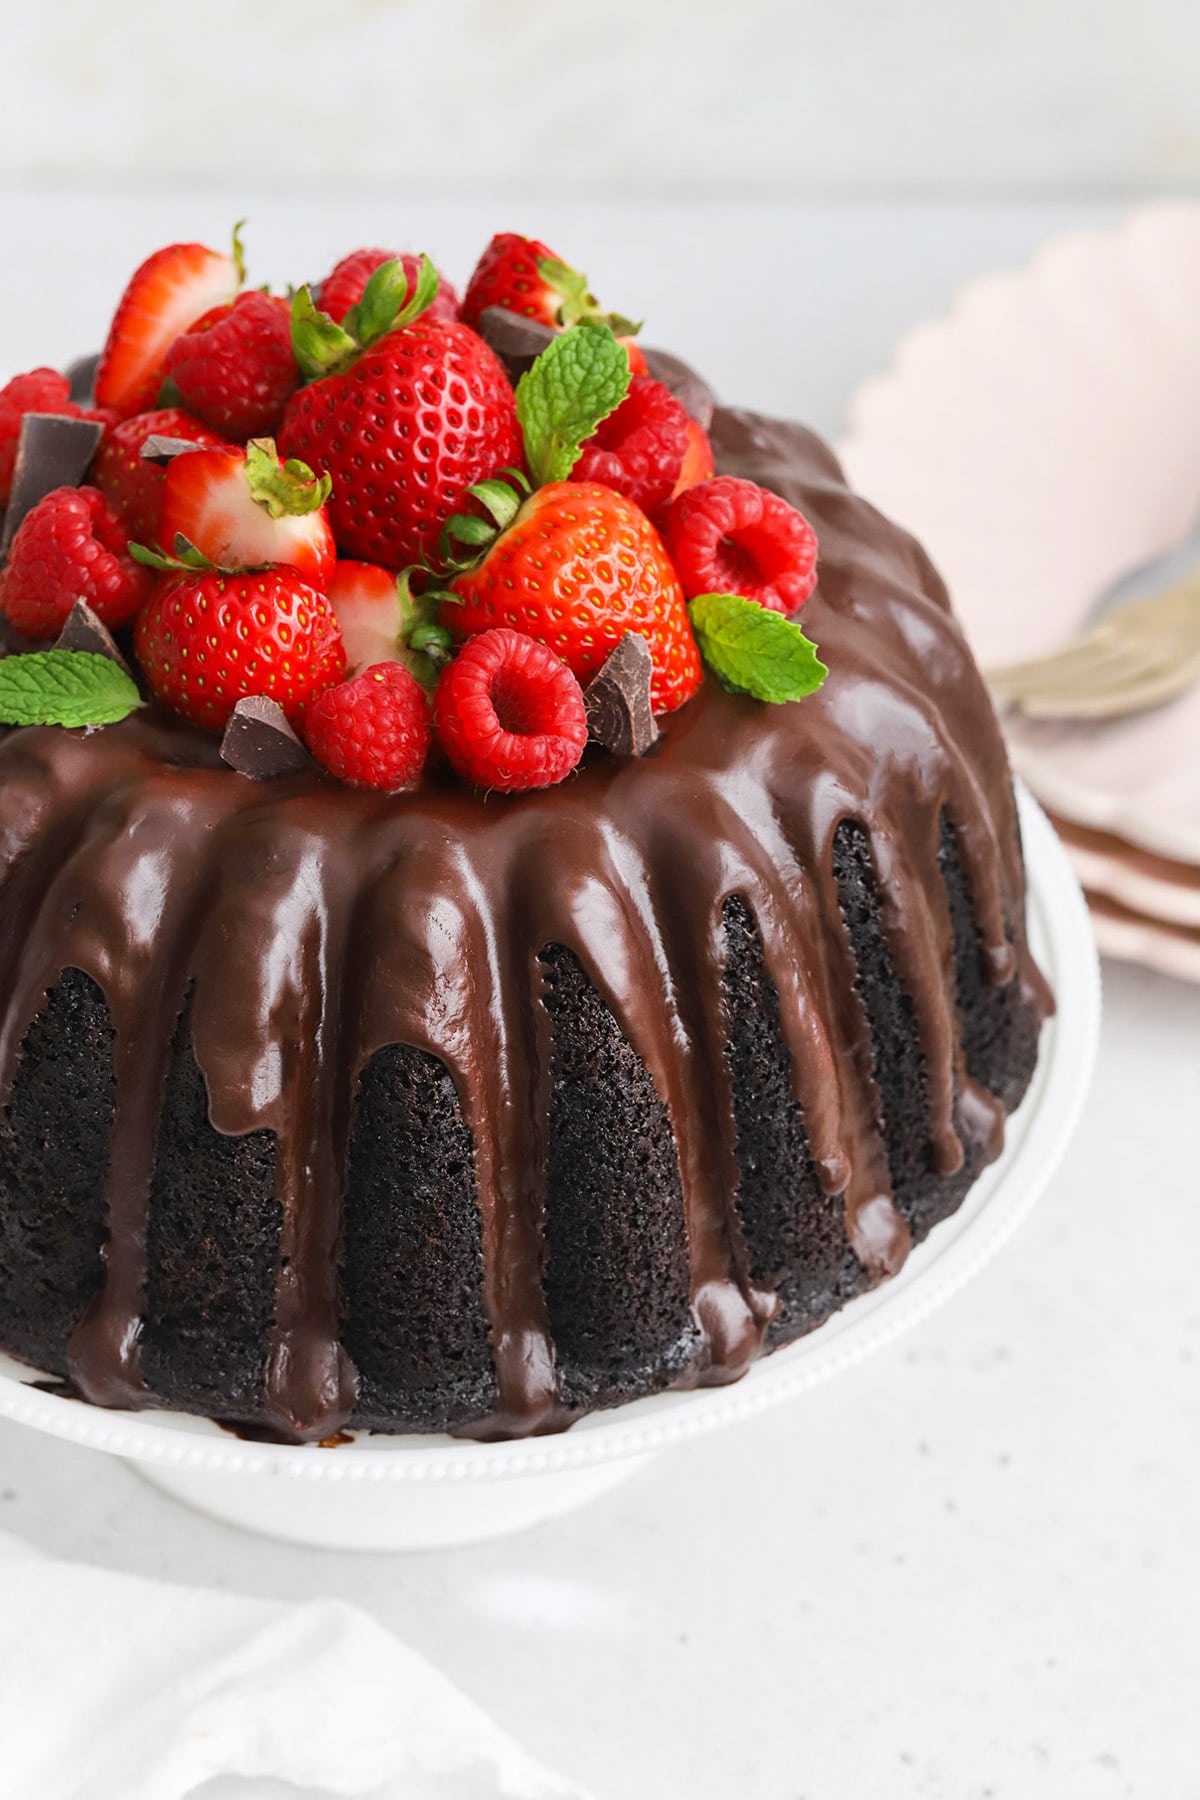 Front view of gluten-free bundt cake with chocolate glaze